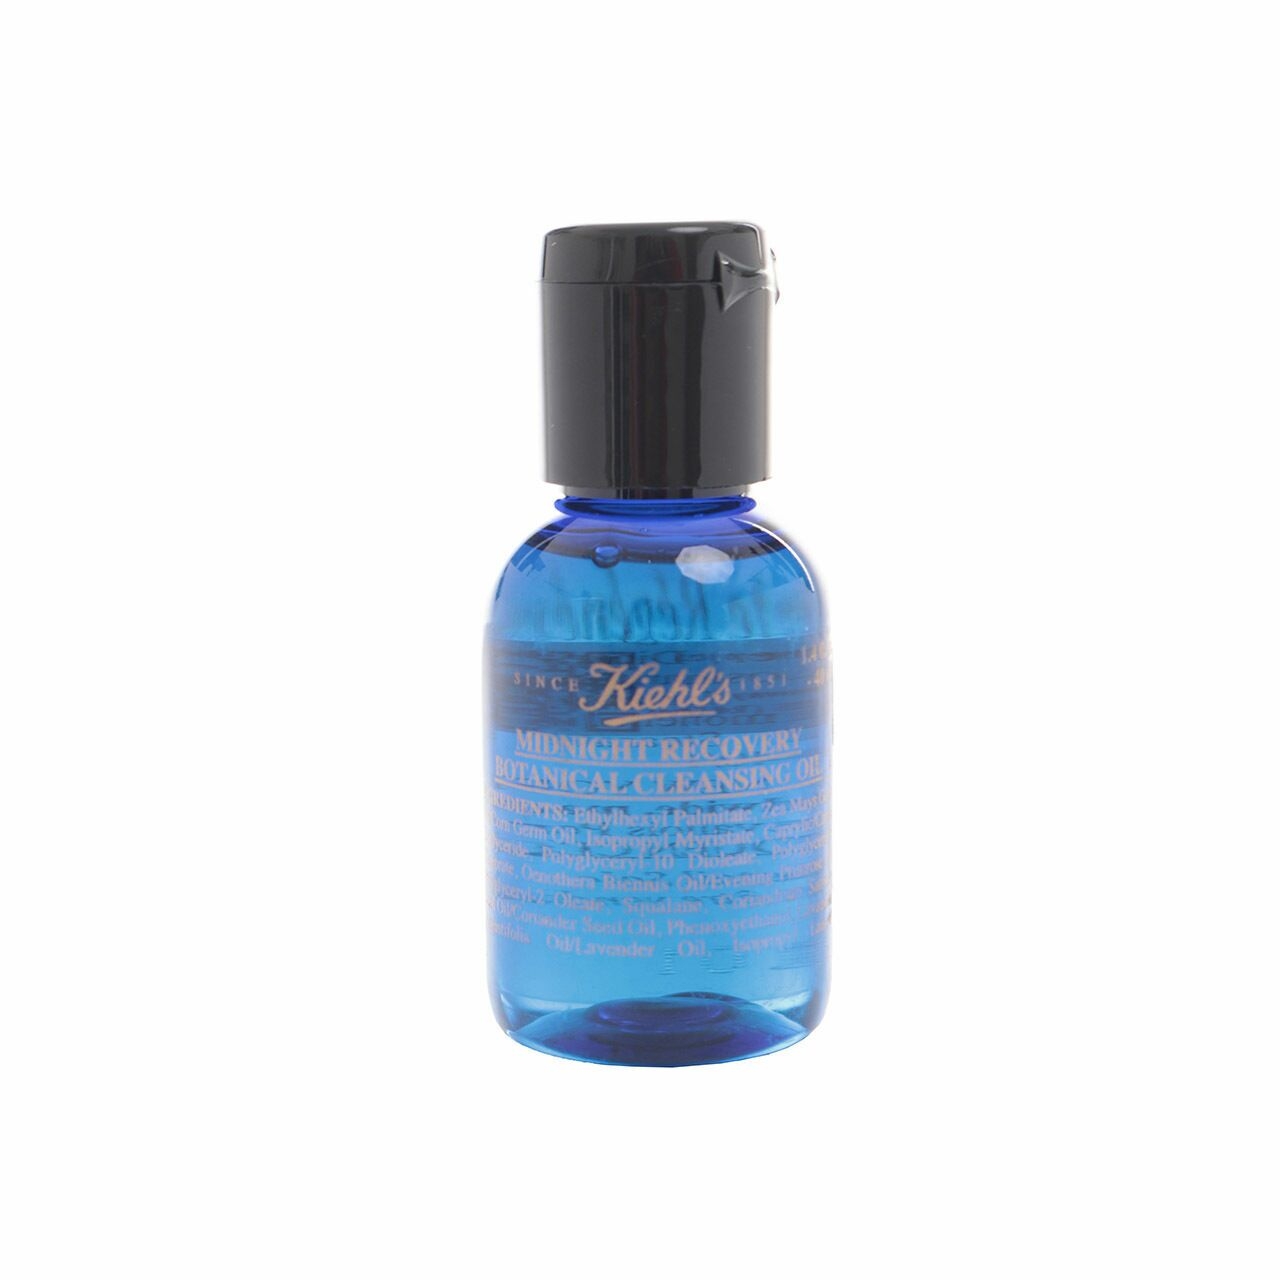 Kiehl's Midnight Recovery Botanical Cleansing Oil Skin Care